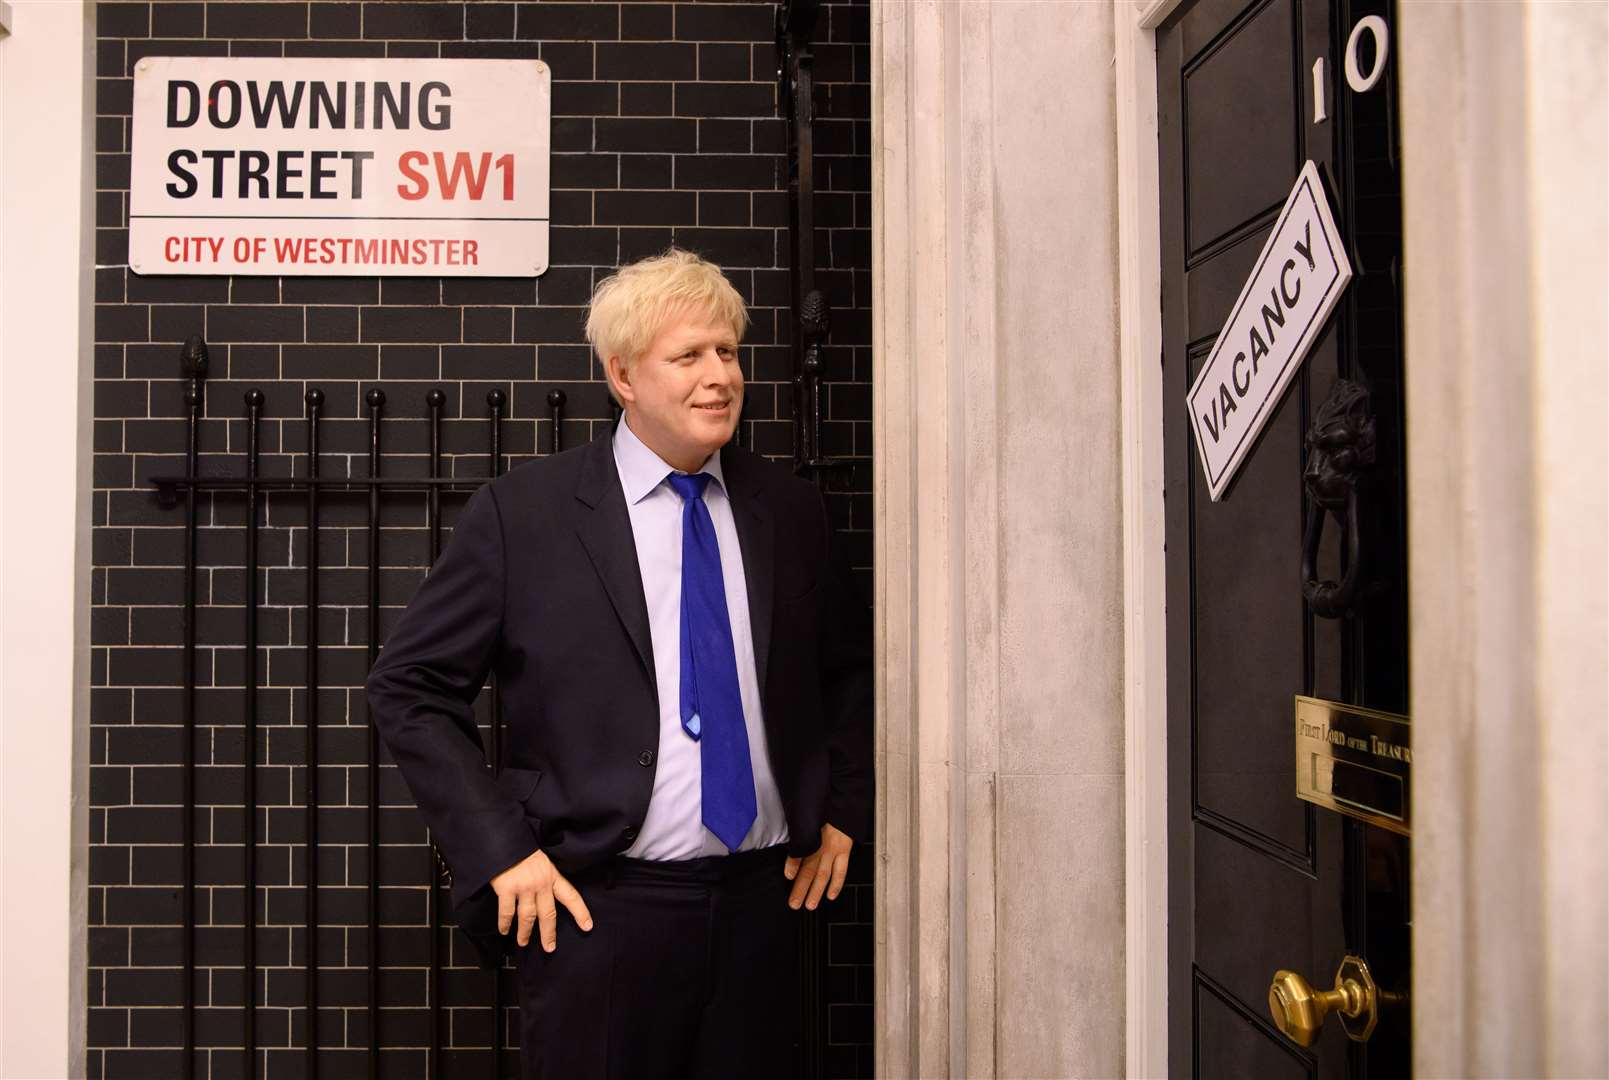 Madame Tussauds in London updated its 10 Downing Street display (Madame Tussauds London/PA)